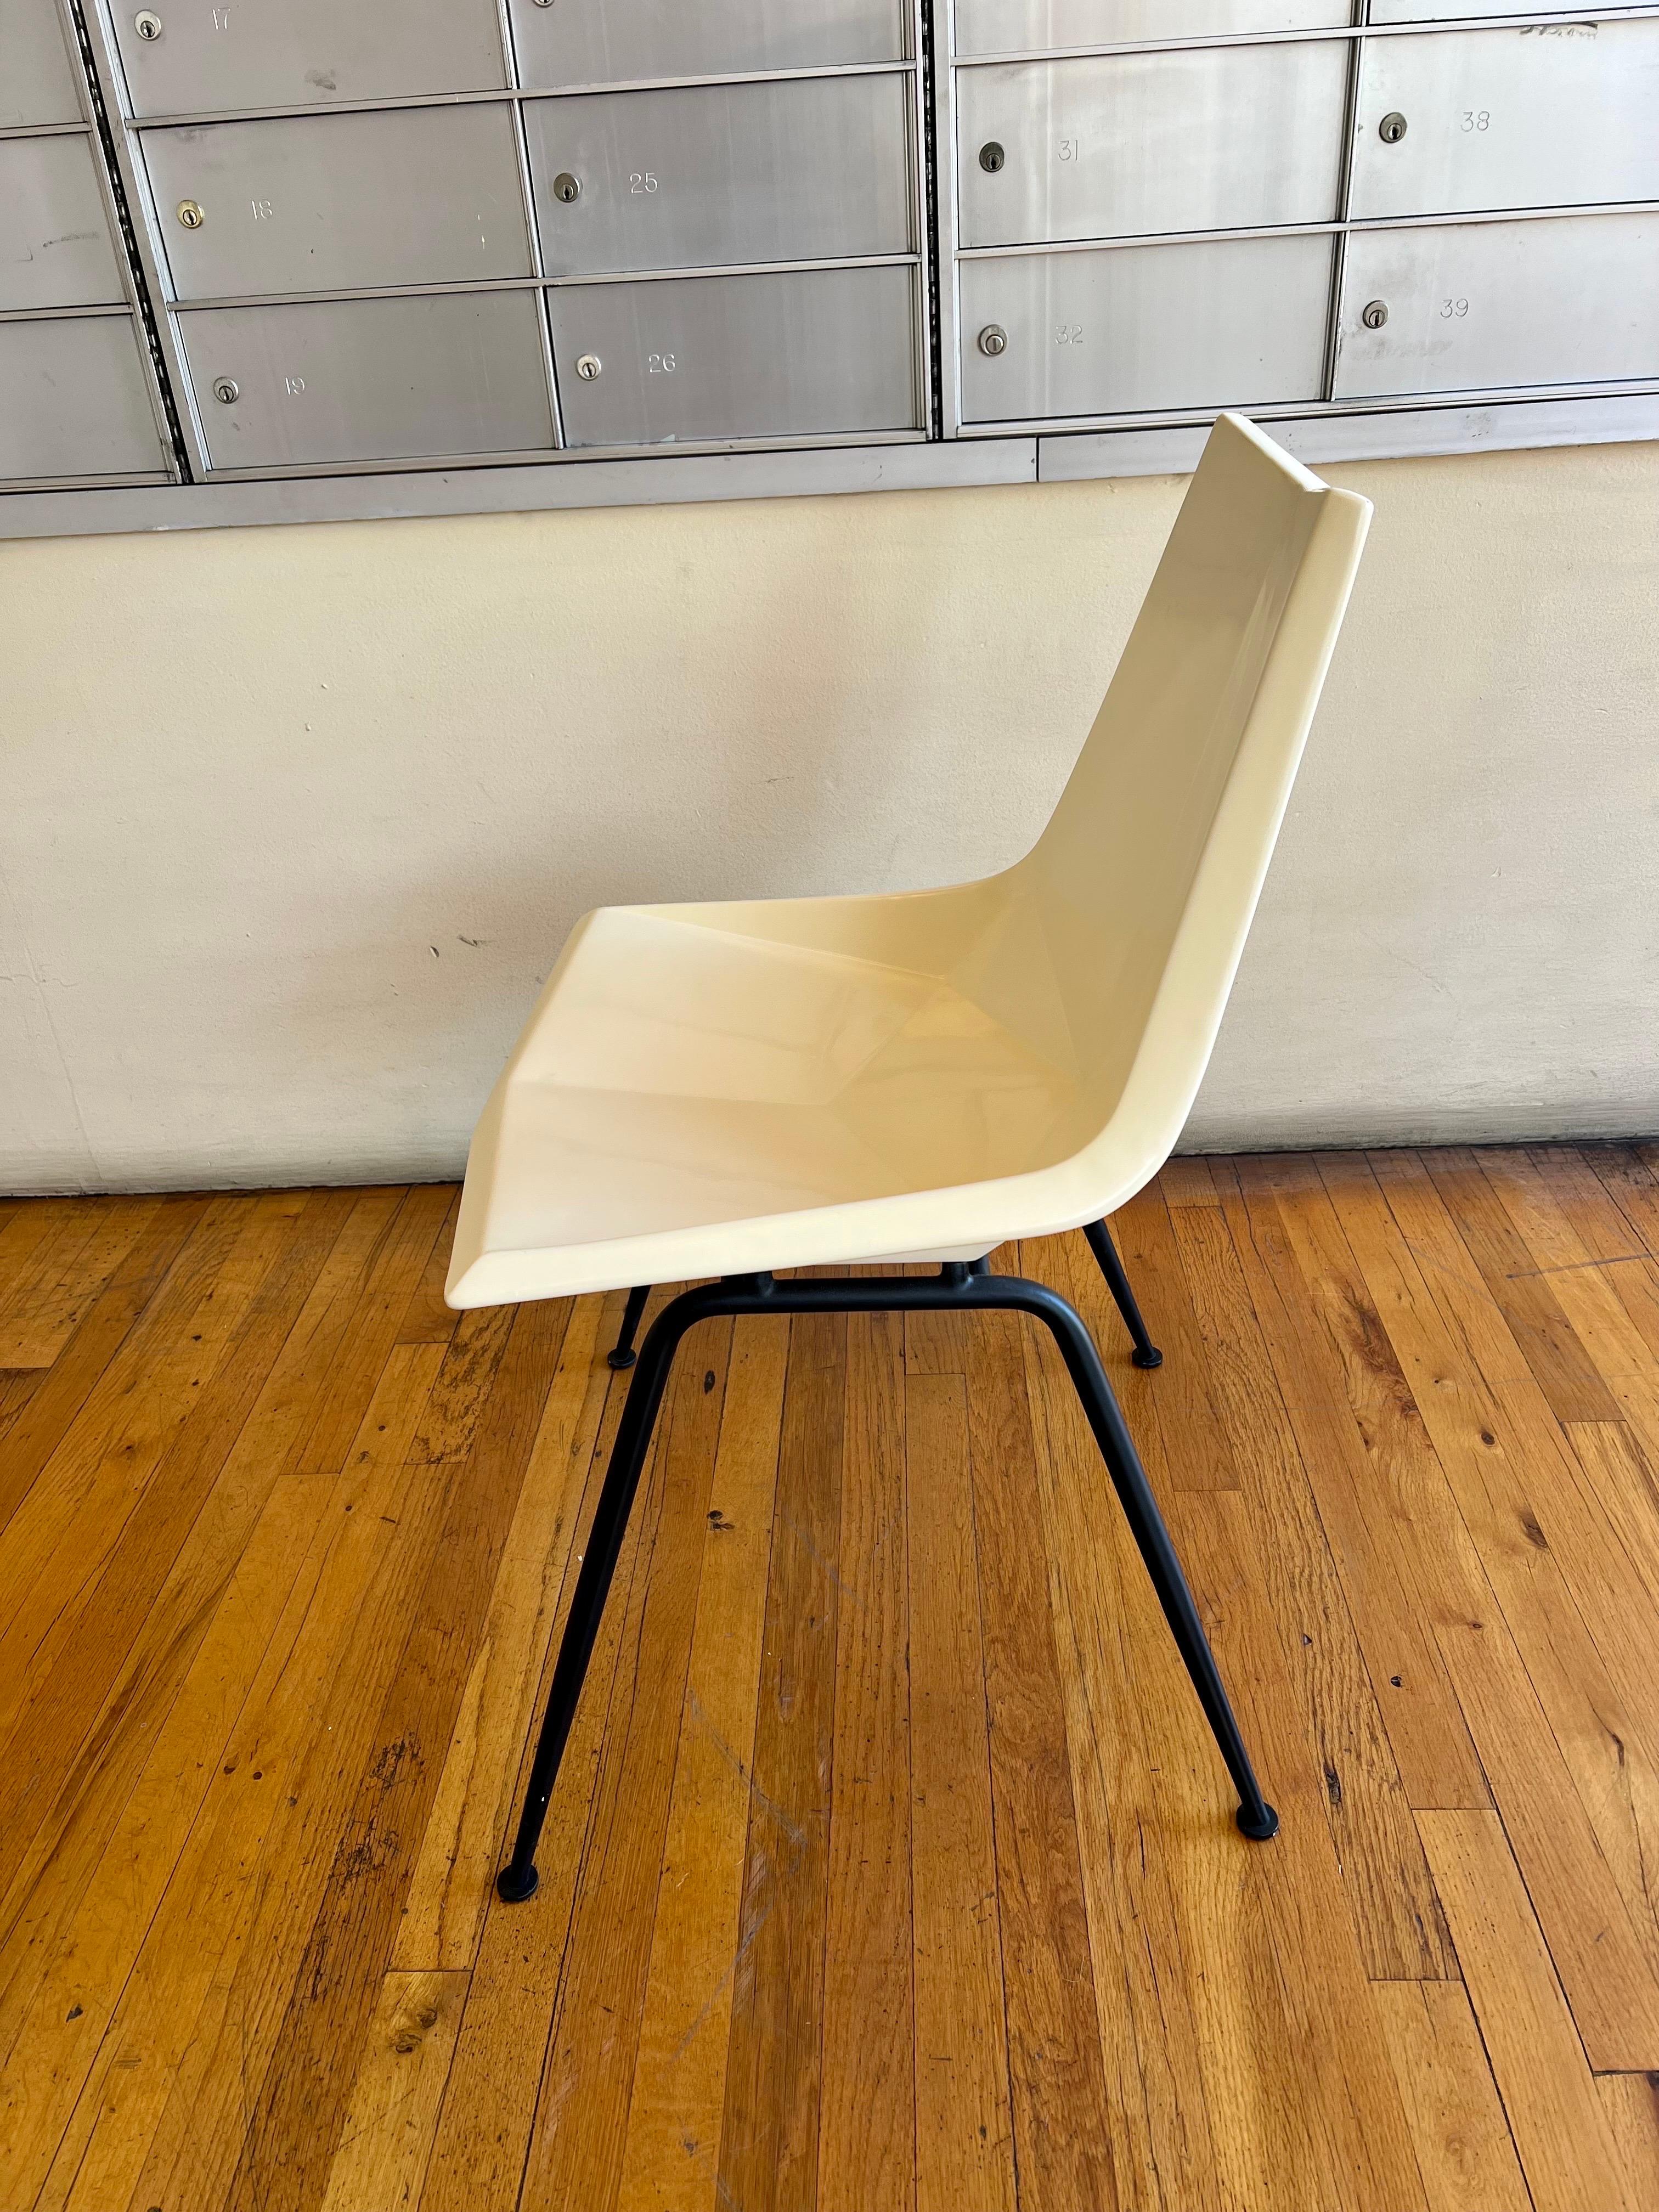 Beautiful elegant classic origami chair lightly used great color and condition, designed by Paul McCobb.